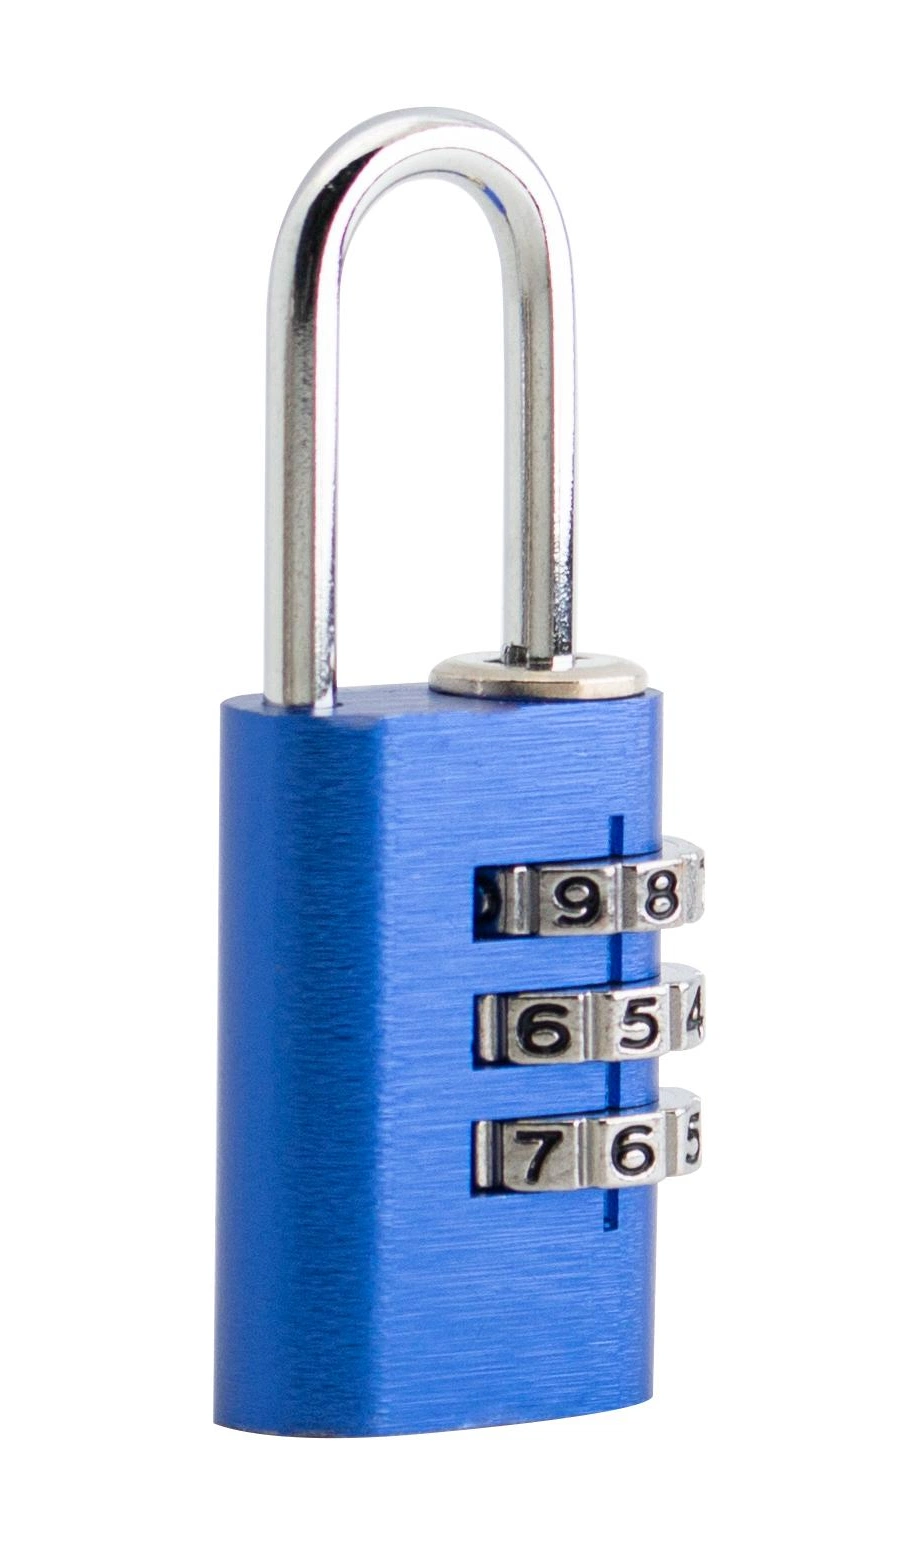 4 Digit Small Combination Padlock for Travel Luggage-Blue